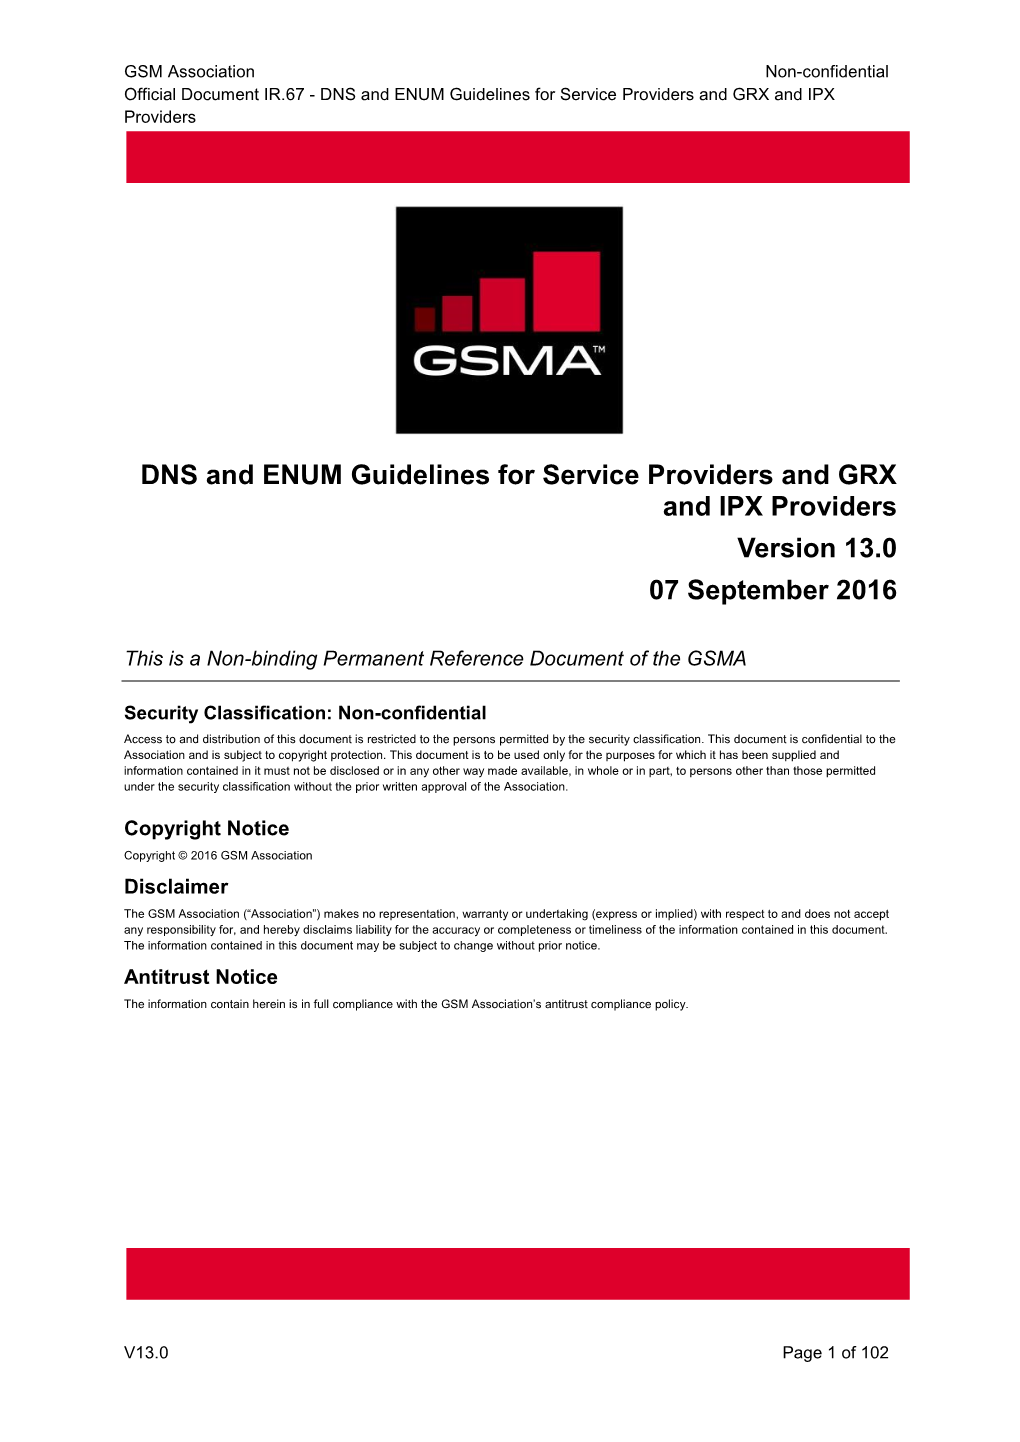 DNS and ENUM Guidelines for Service Providers and GRX and IPX Providers